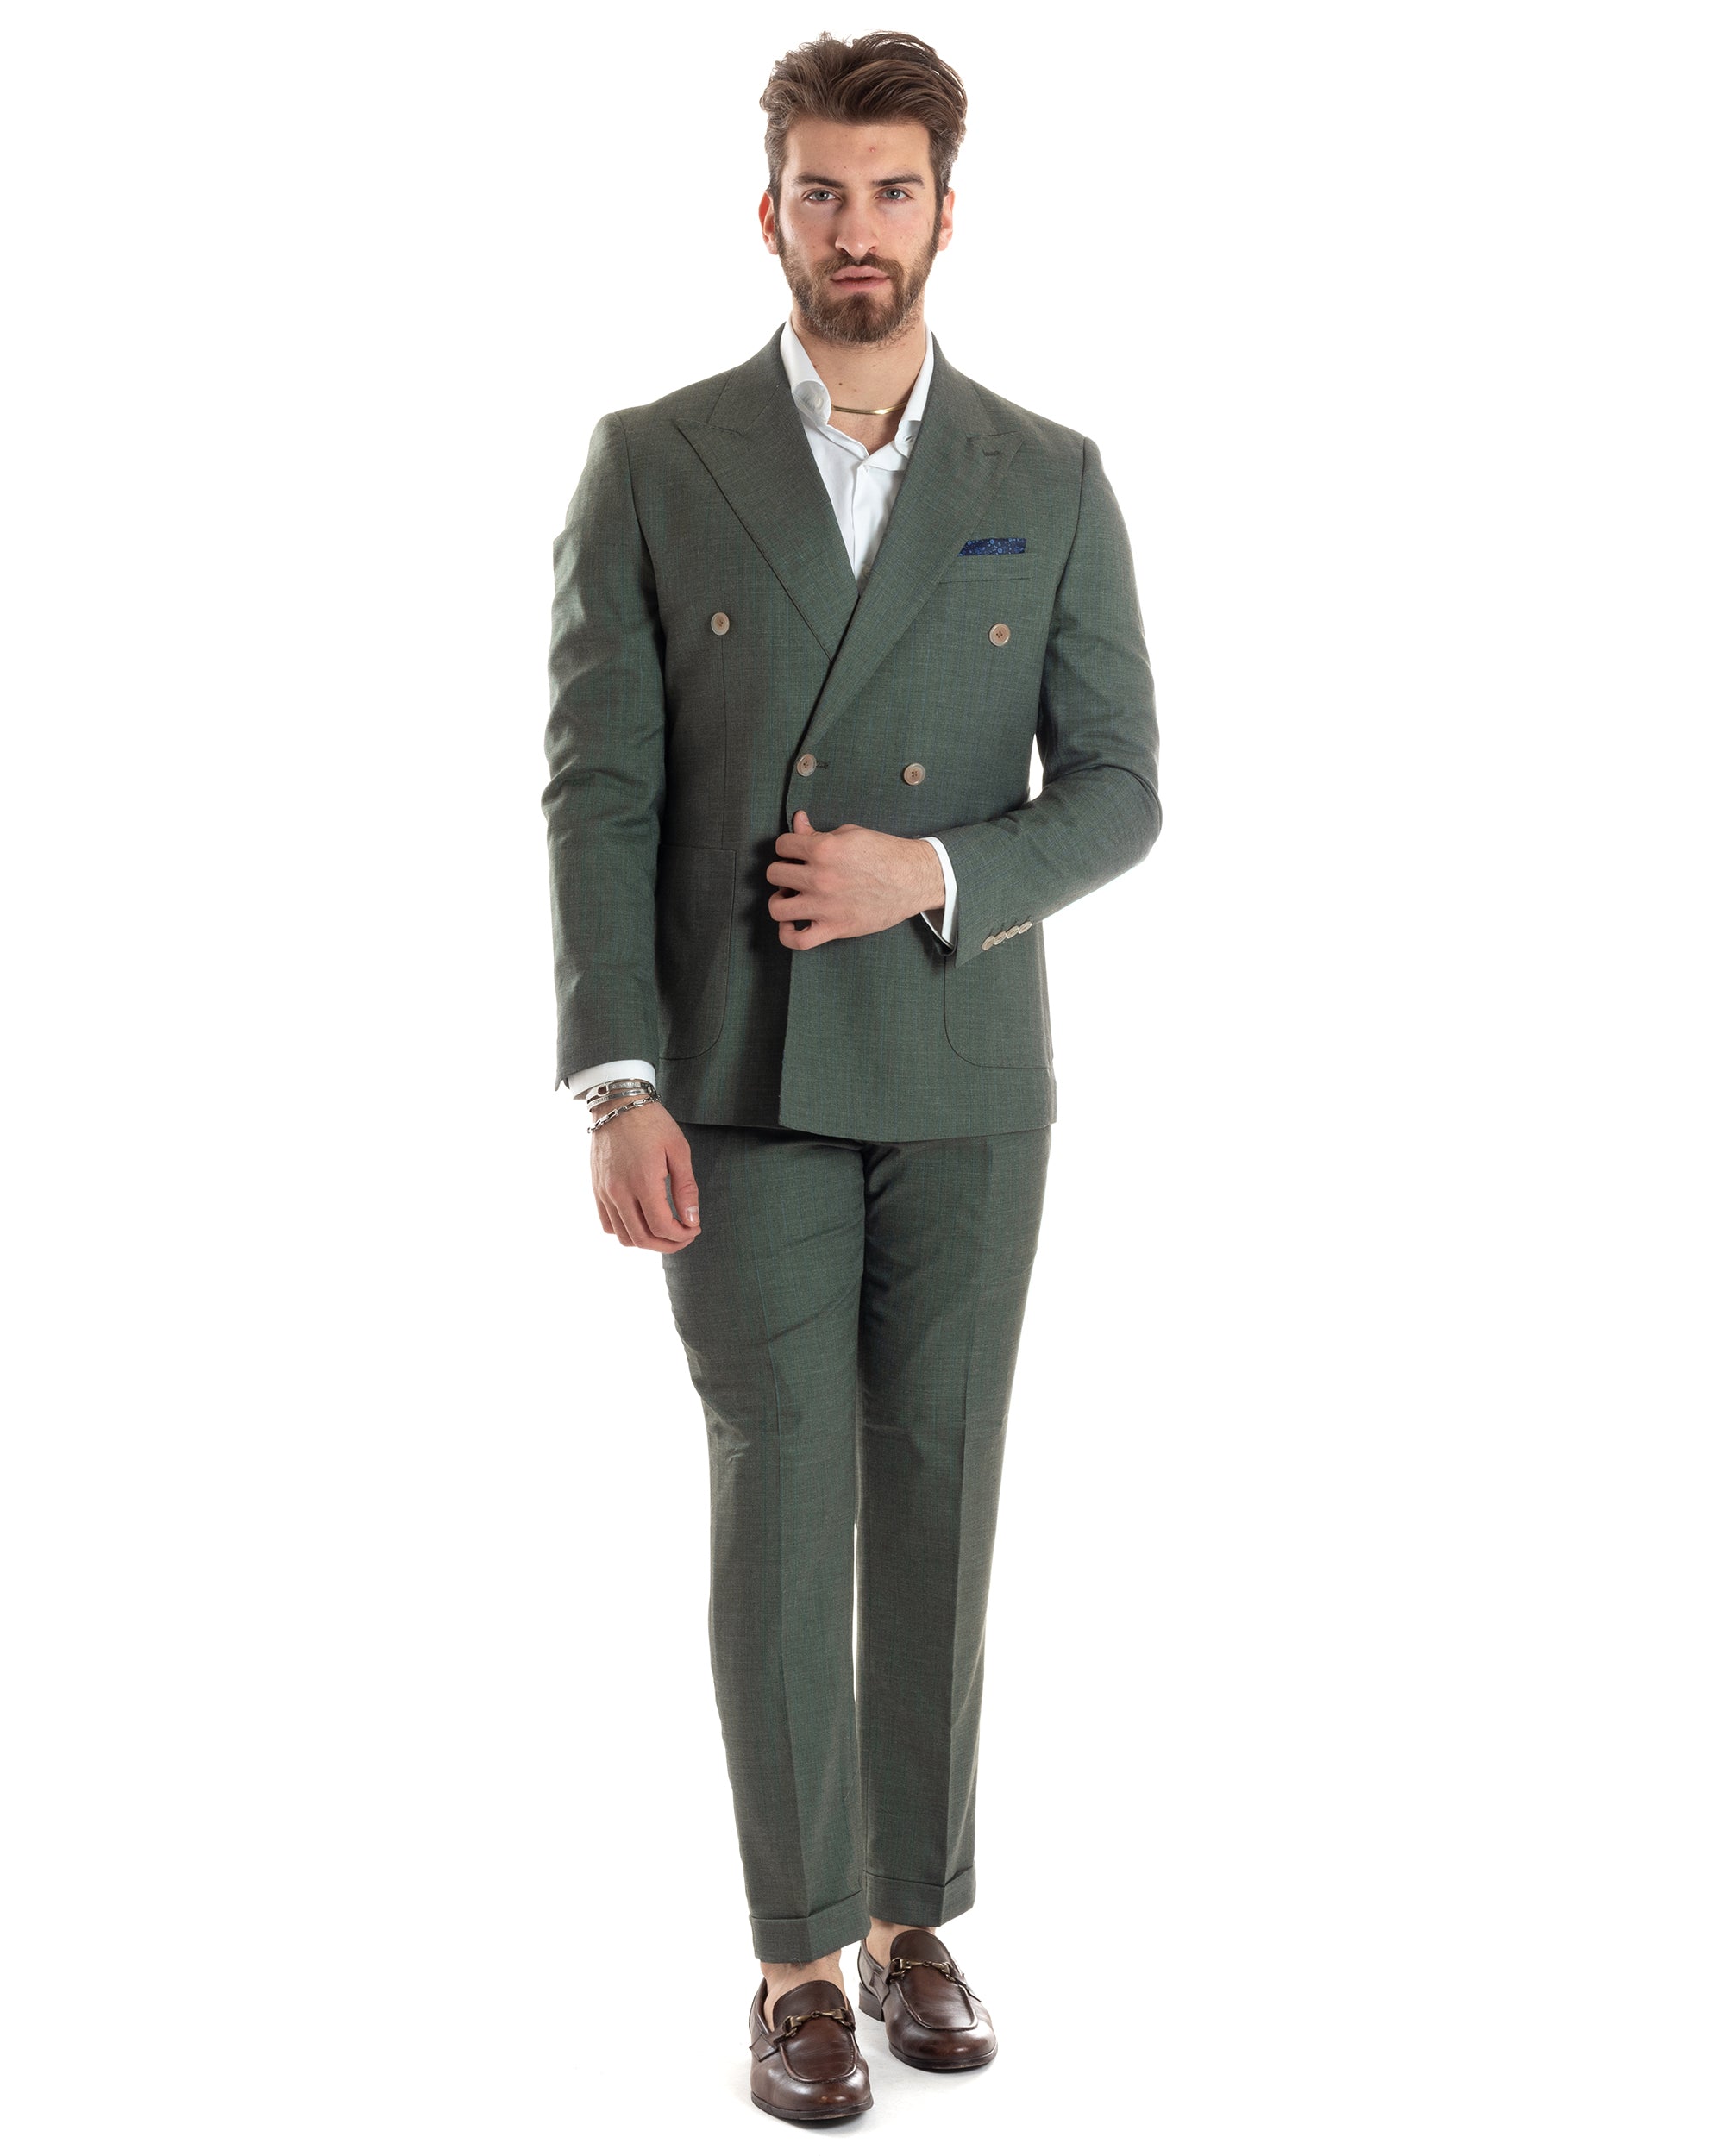 Double-Breasted Men's Suit Suit Jacket Trousers Green Pinstripe Elegant Casual GIOSAL-OU2405A